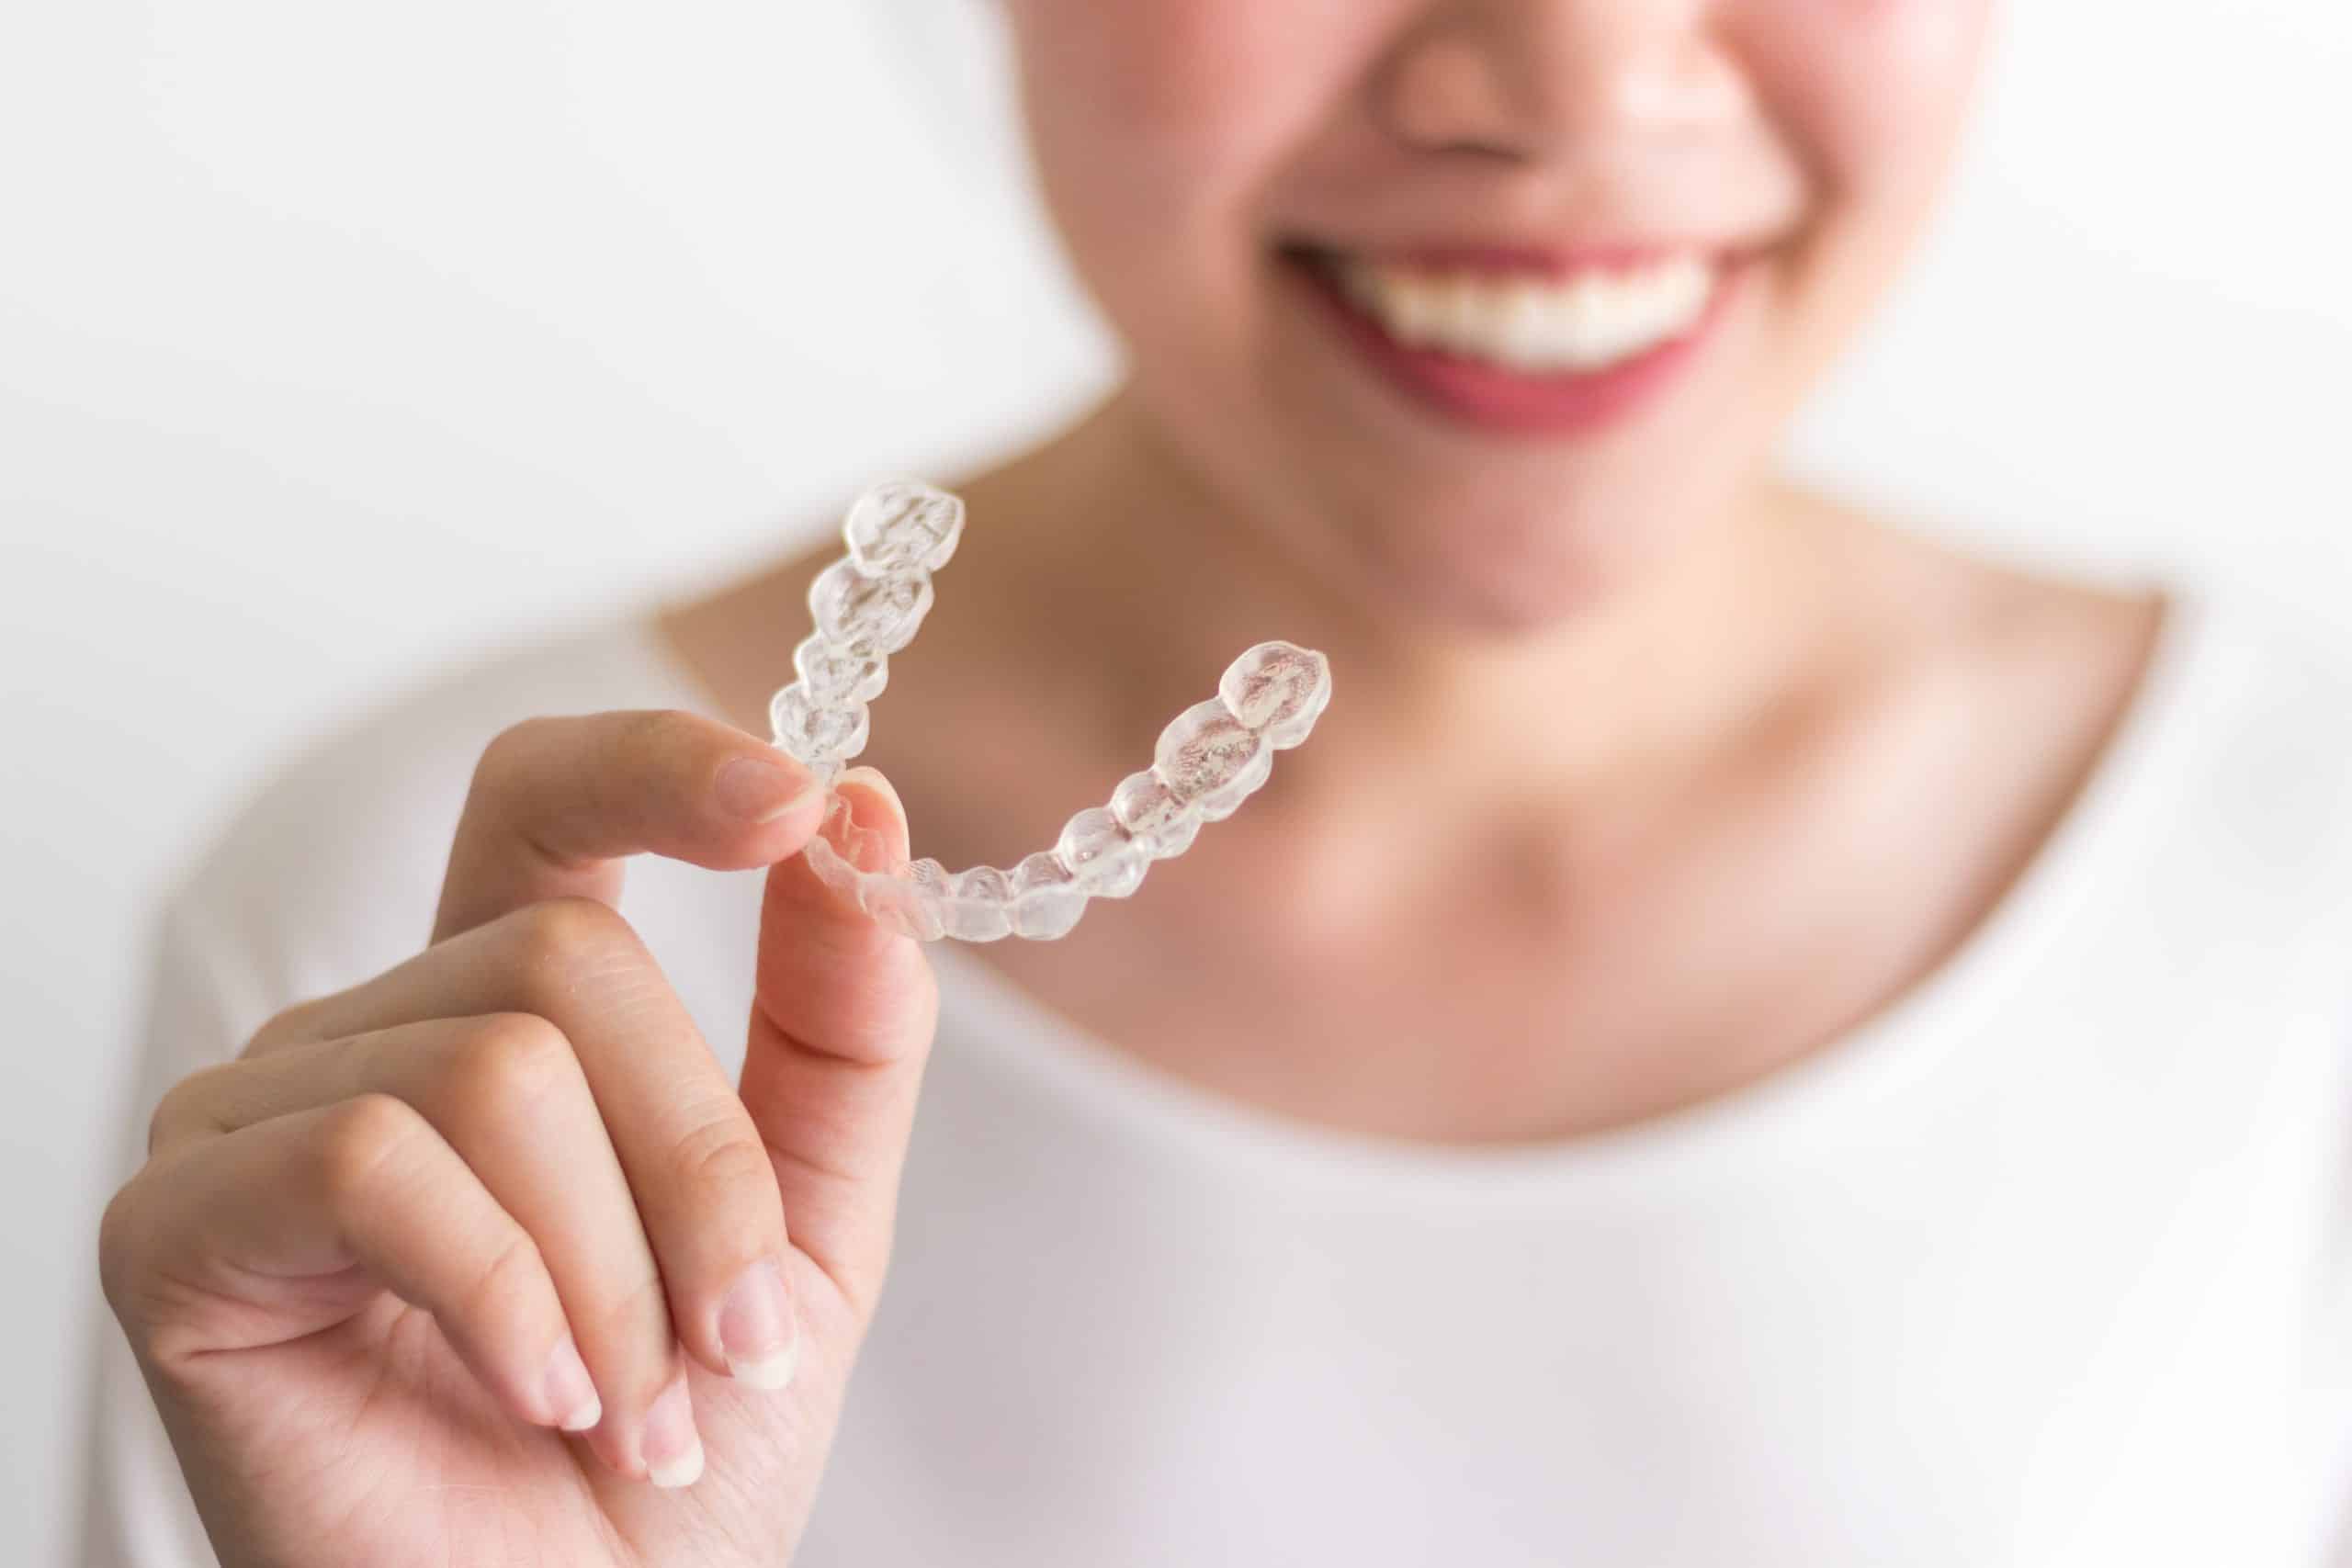 How Are Clear Aligners by Invisalign Made?